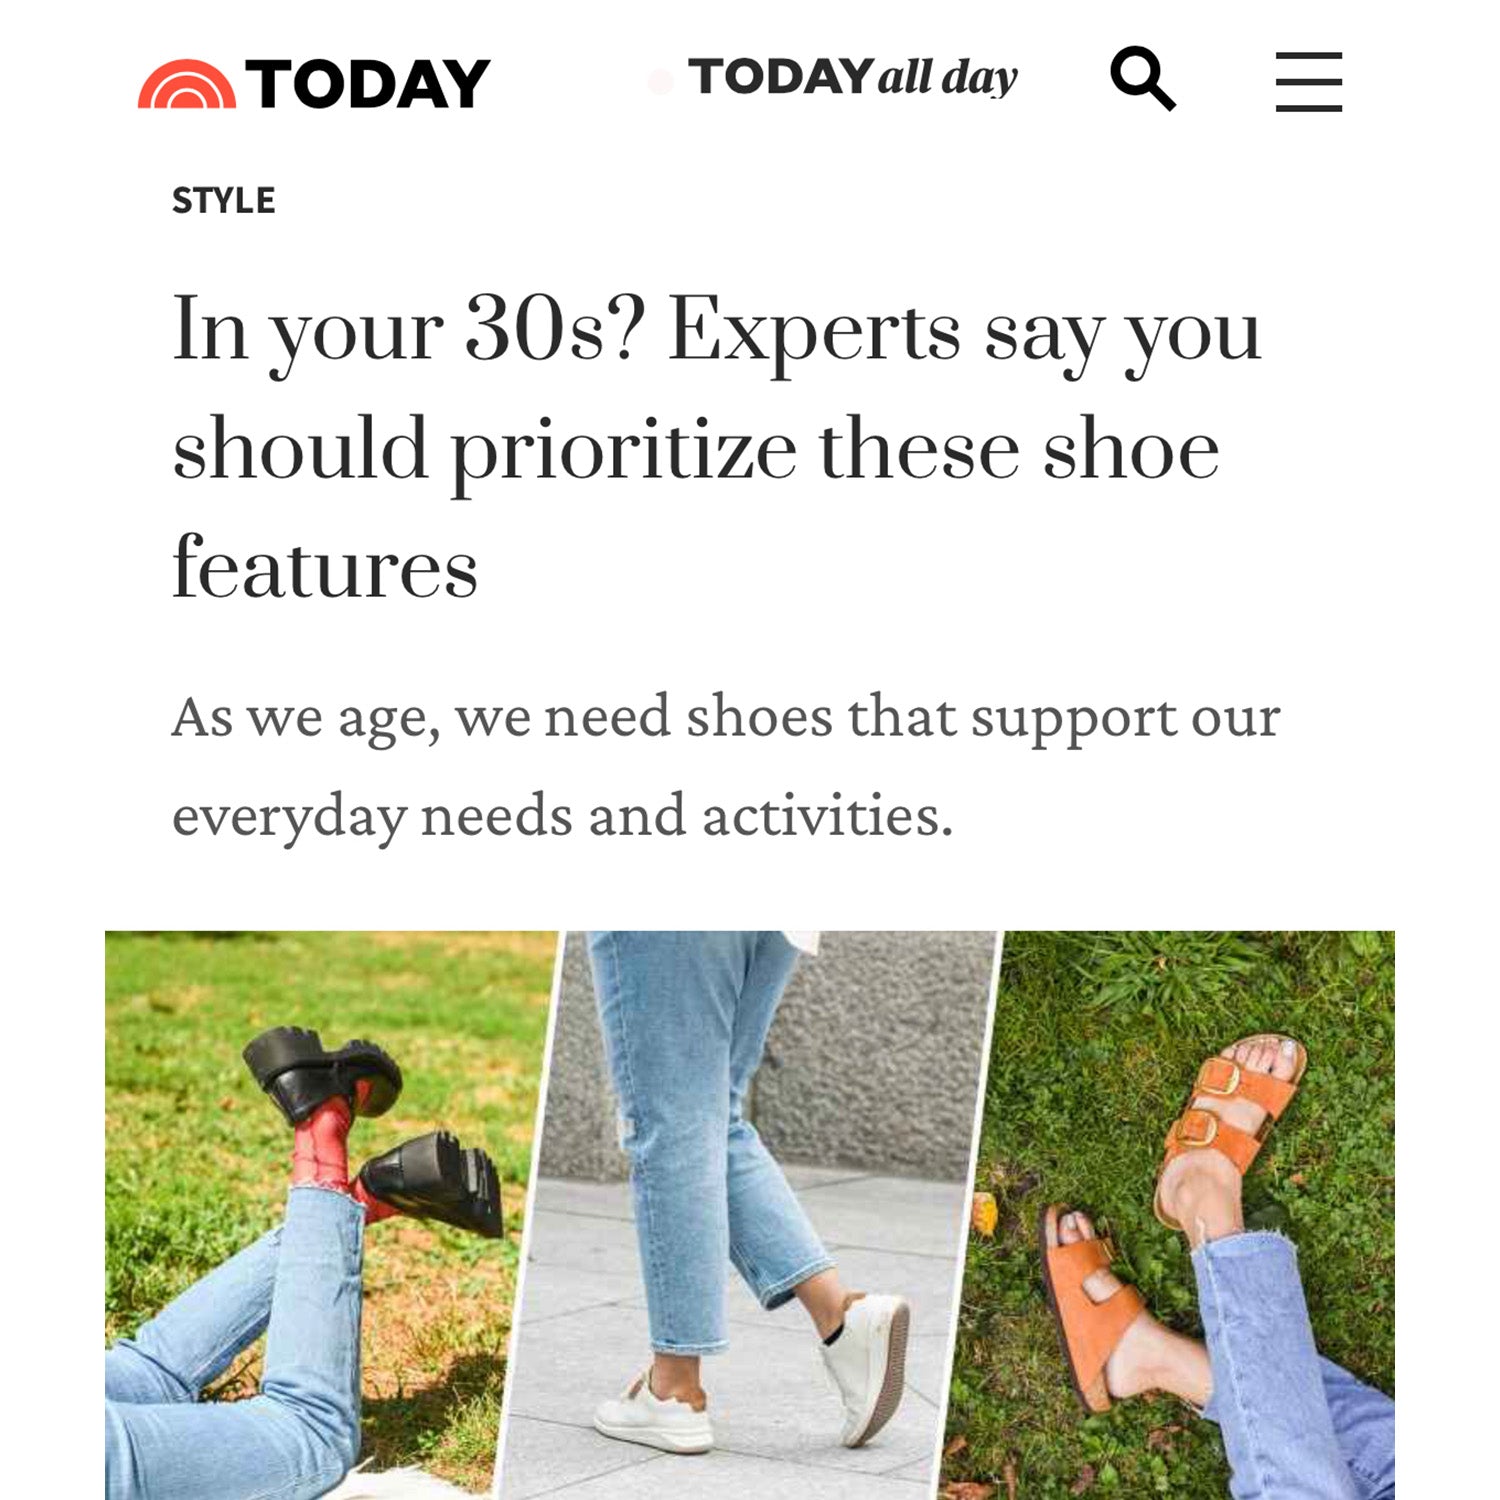 Today - Prioritize this Shoes Feautures